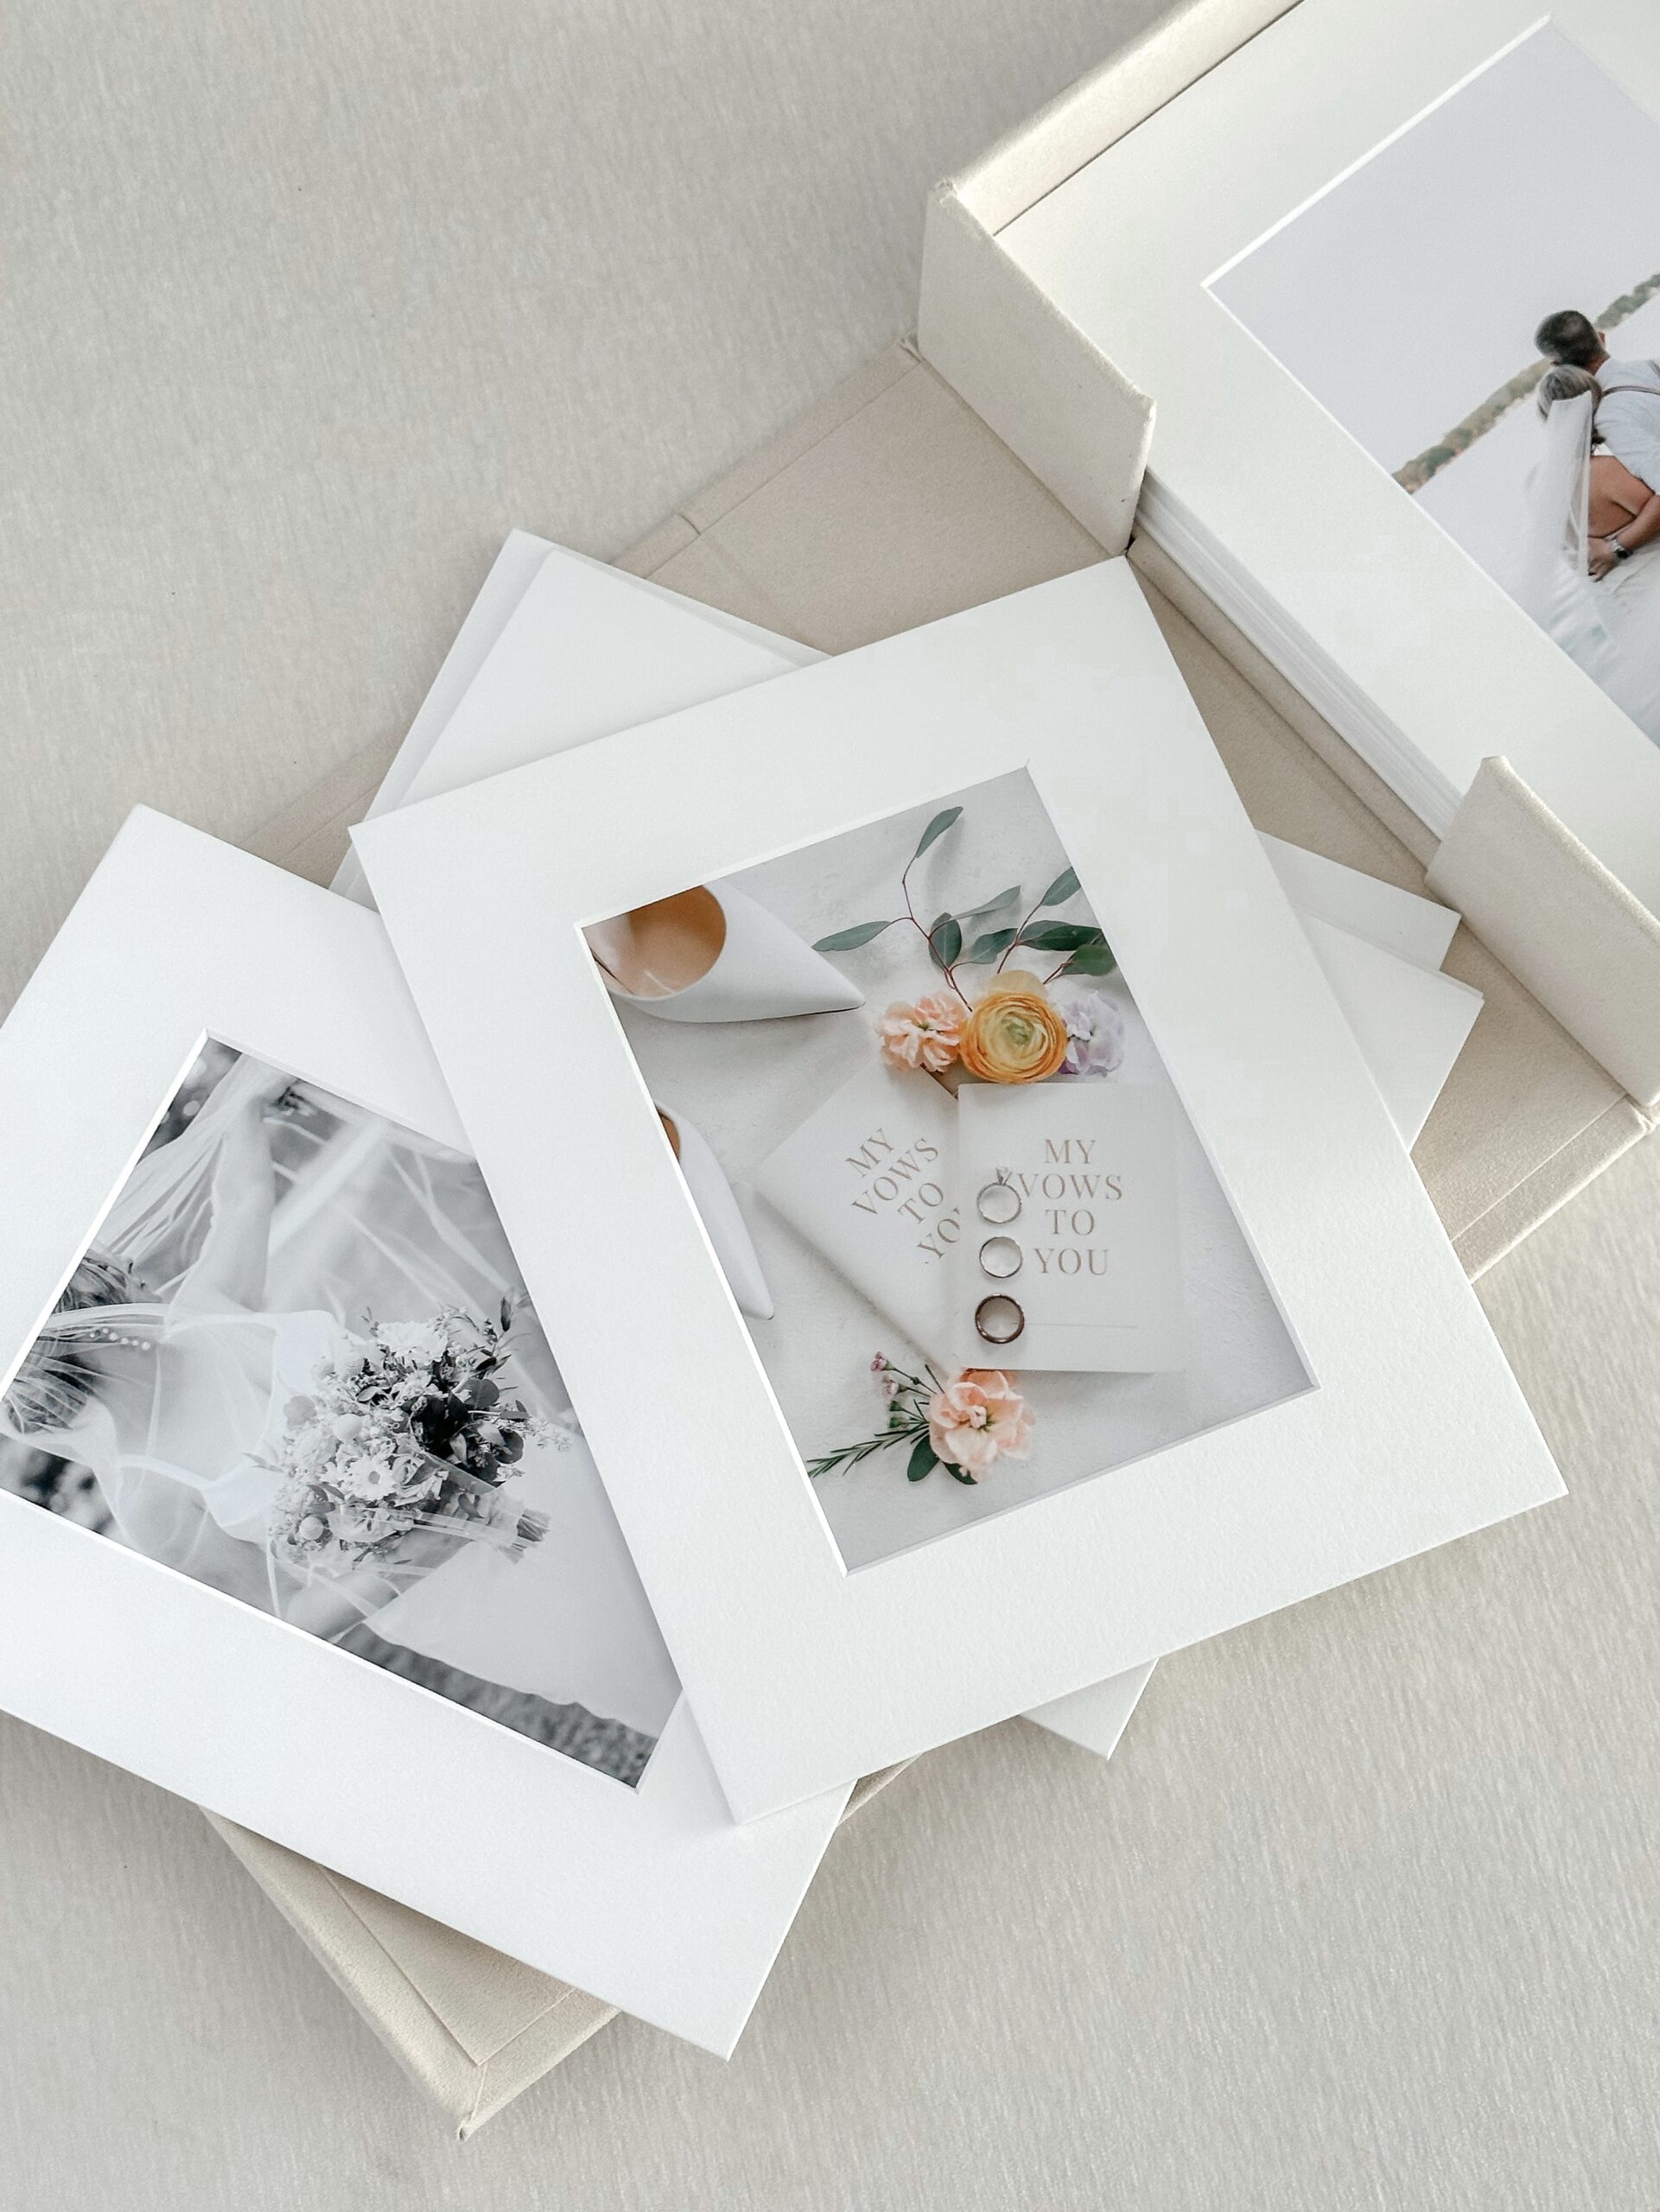 Matted Prints with Heather J Photography